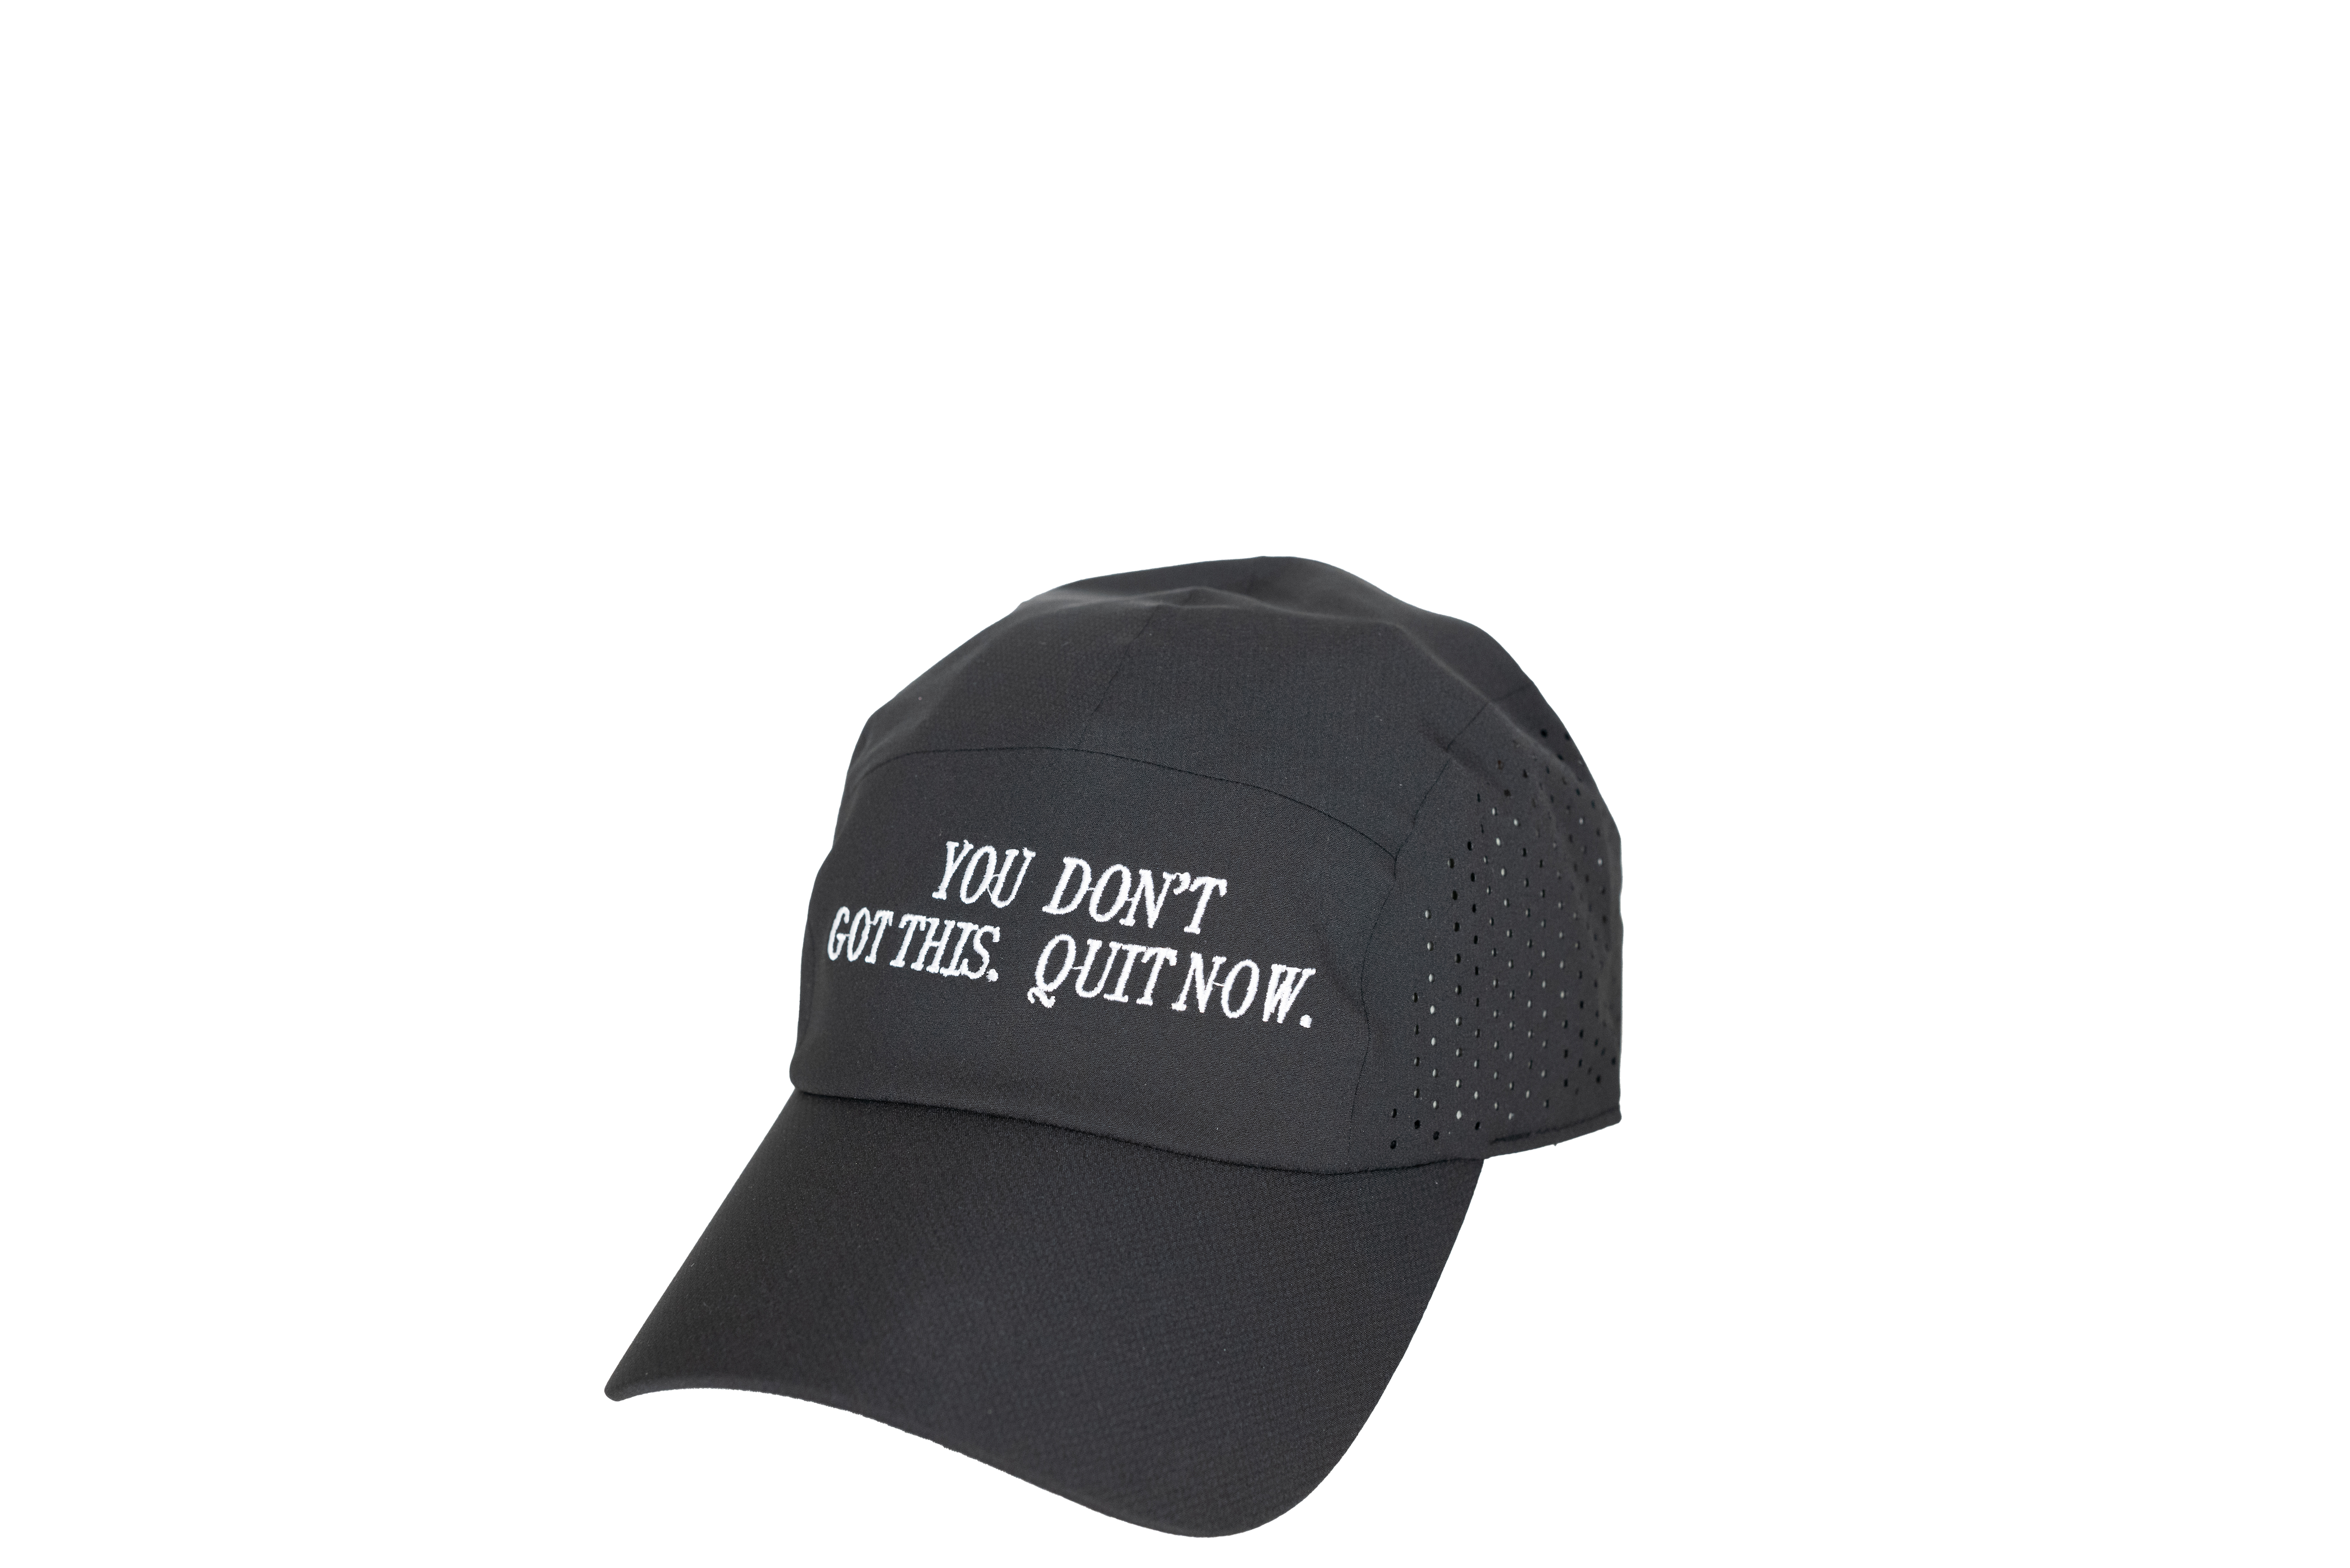 Heaps Good Runners "You Got This Don't Quit Now" Performance Running Hat